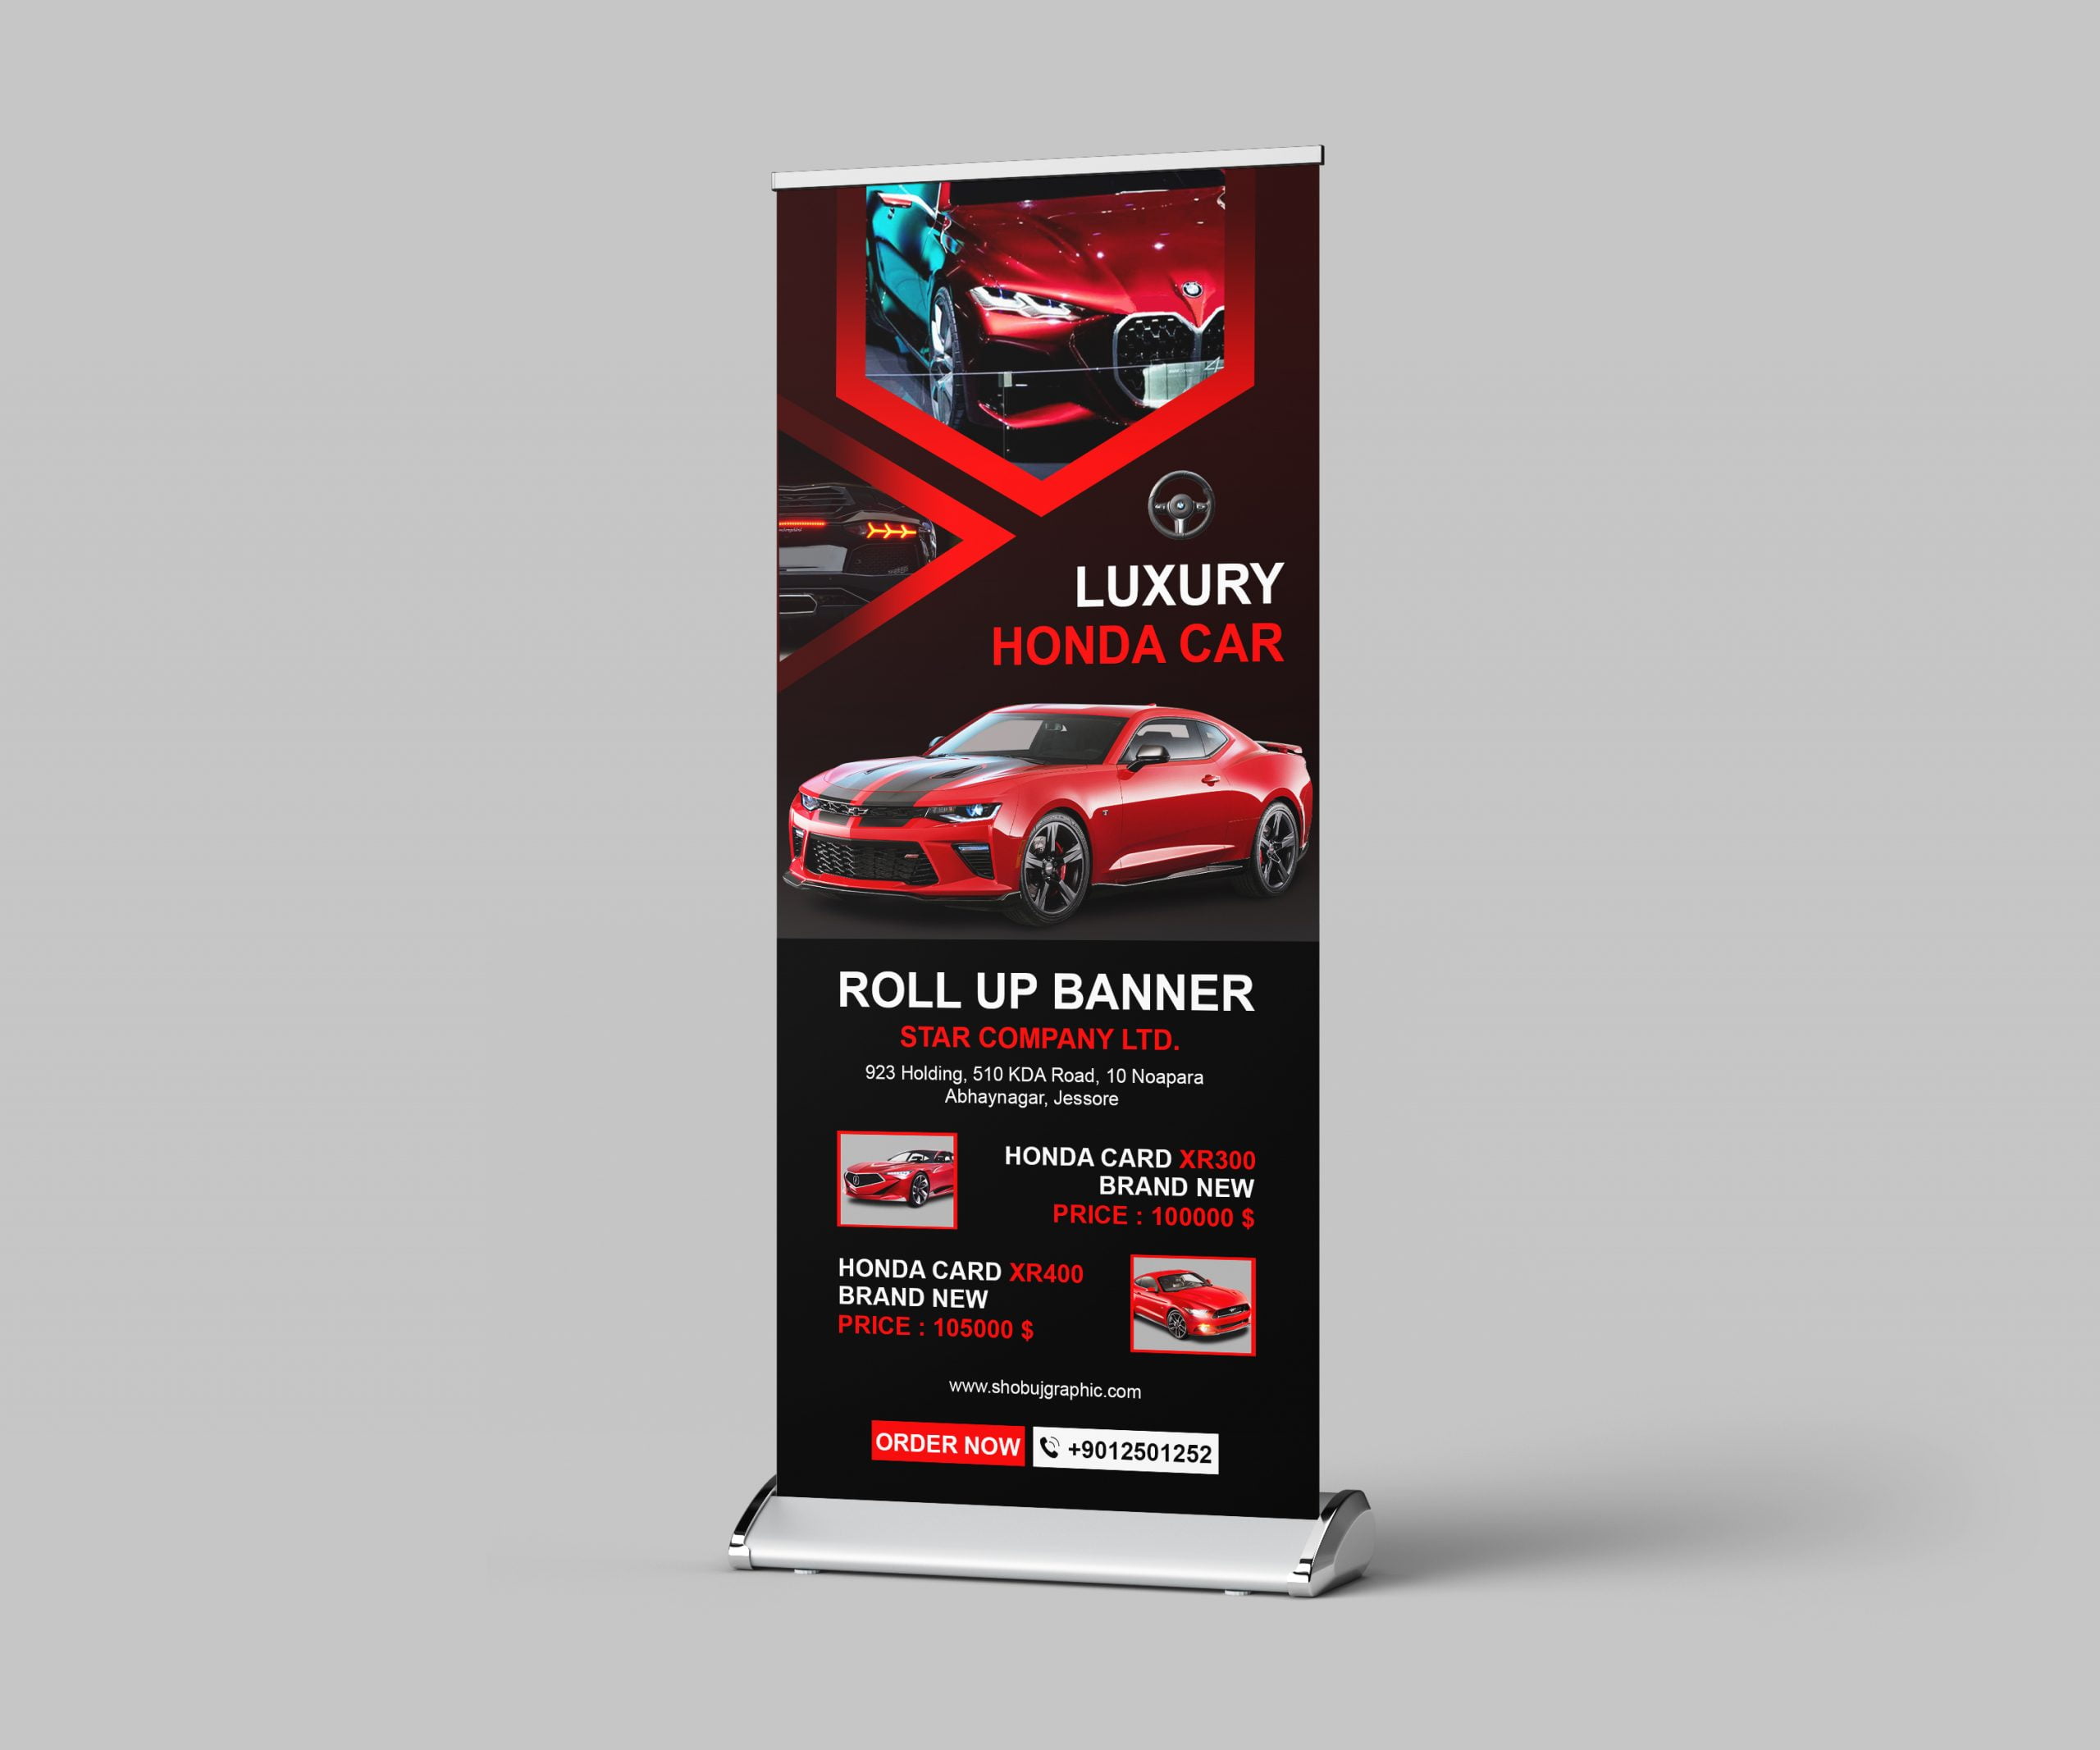 Roll up banner template For Luxury car showroom Free psd